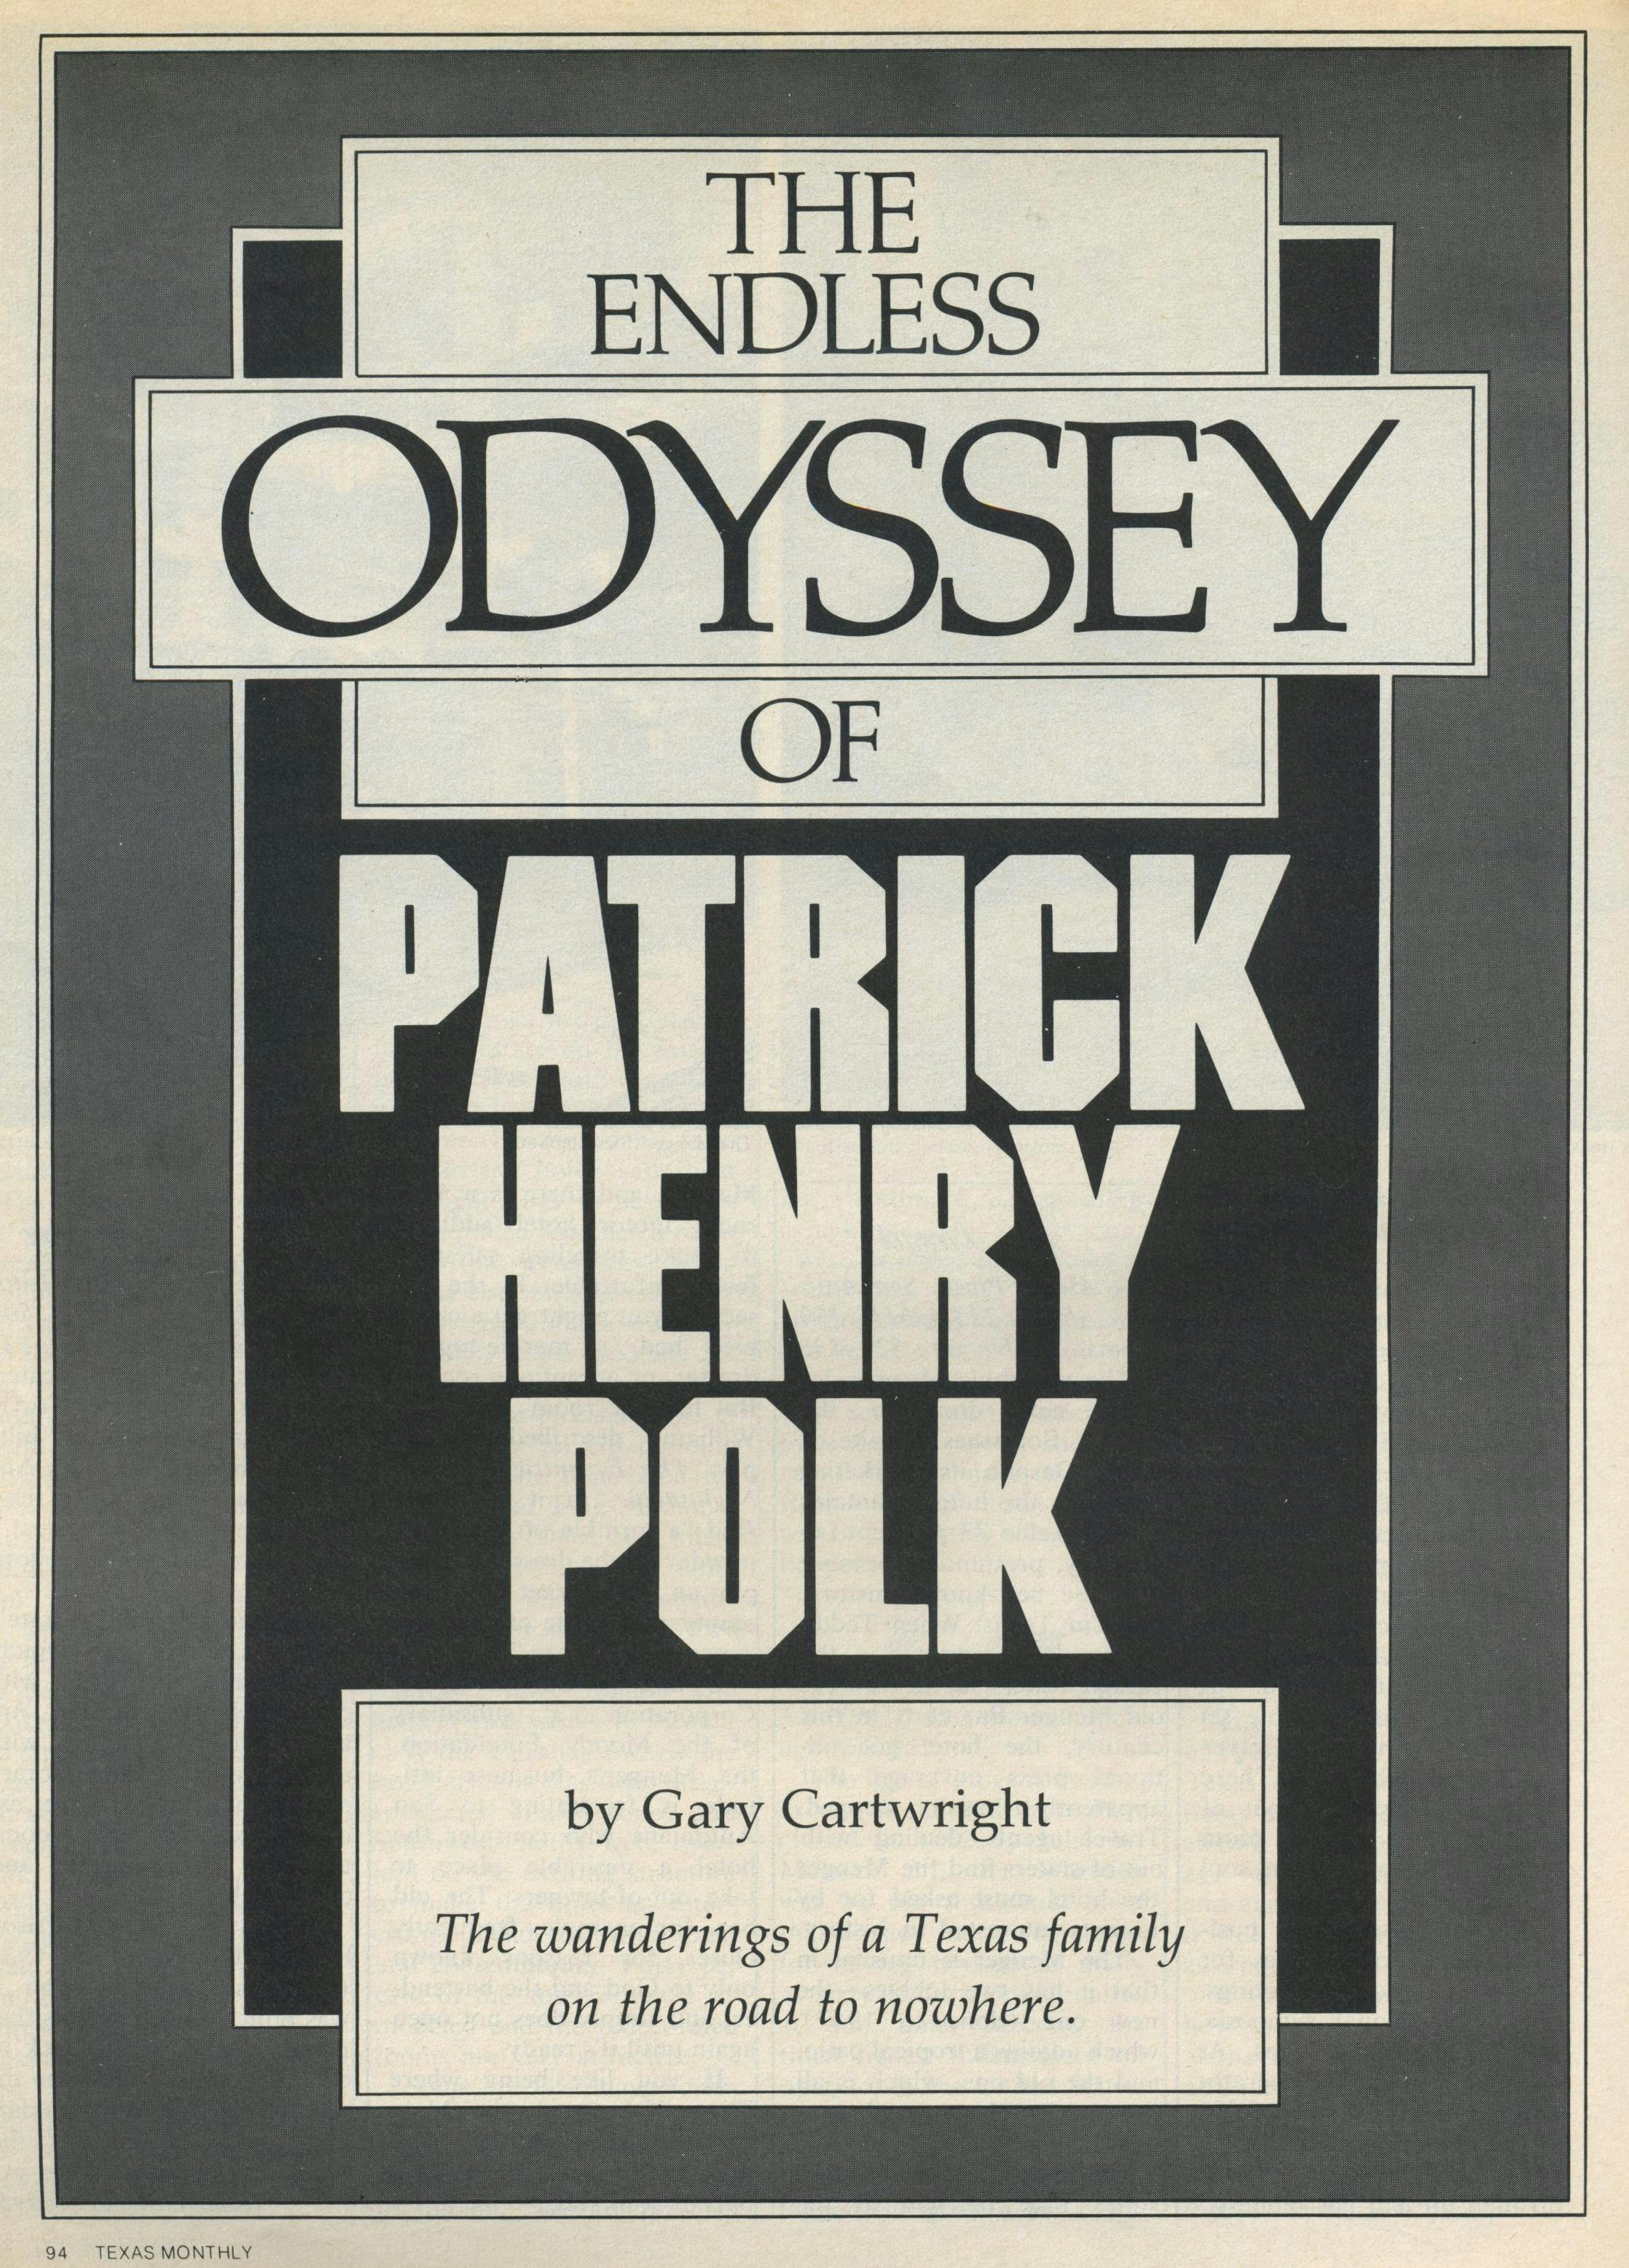 https://img.texasmonthly.com/1977/04/Endless-Odyssey-of-Polk.jpg?auto=compress&crop=faces&fit=fit&fm=pjpg&ixlib=php-3.3.1&q=45